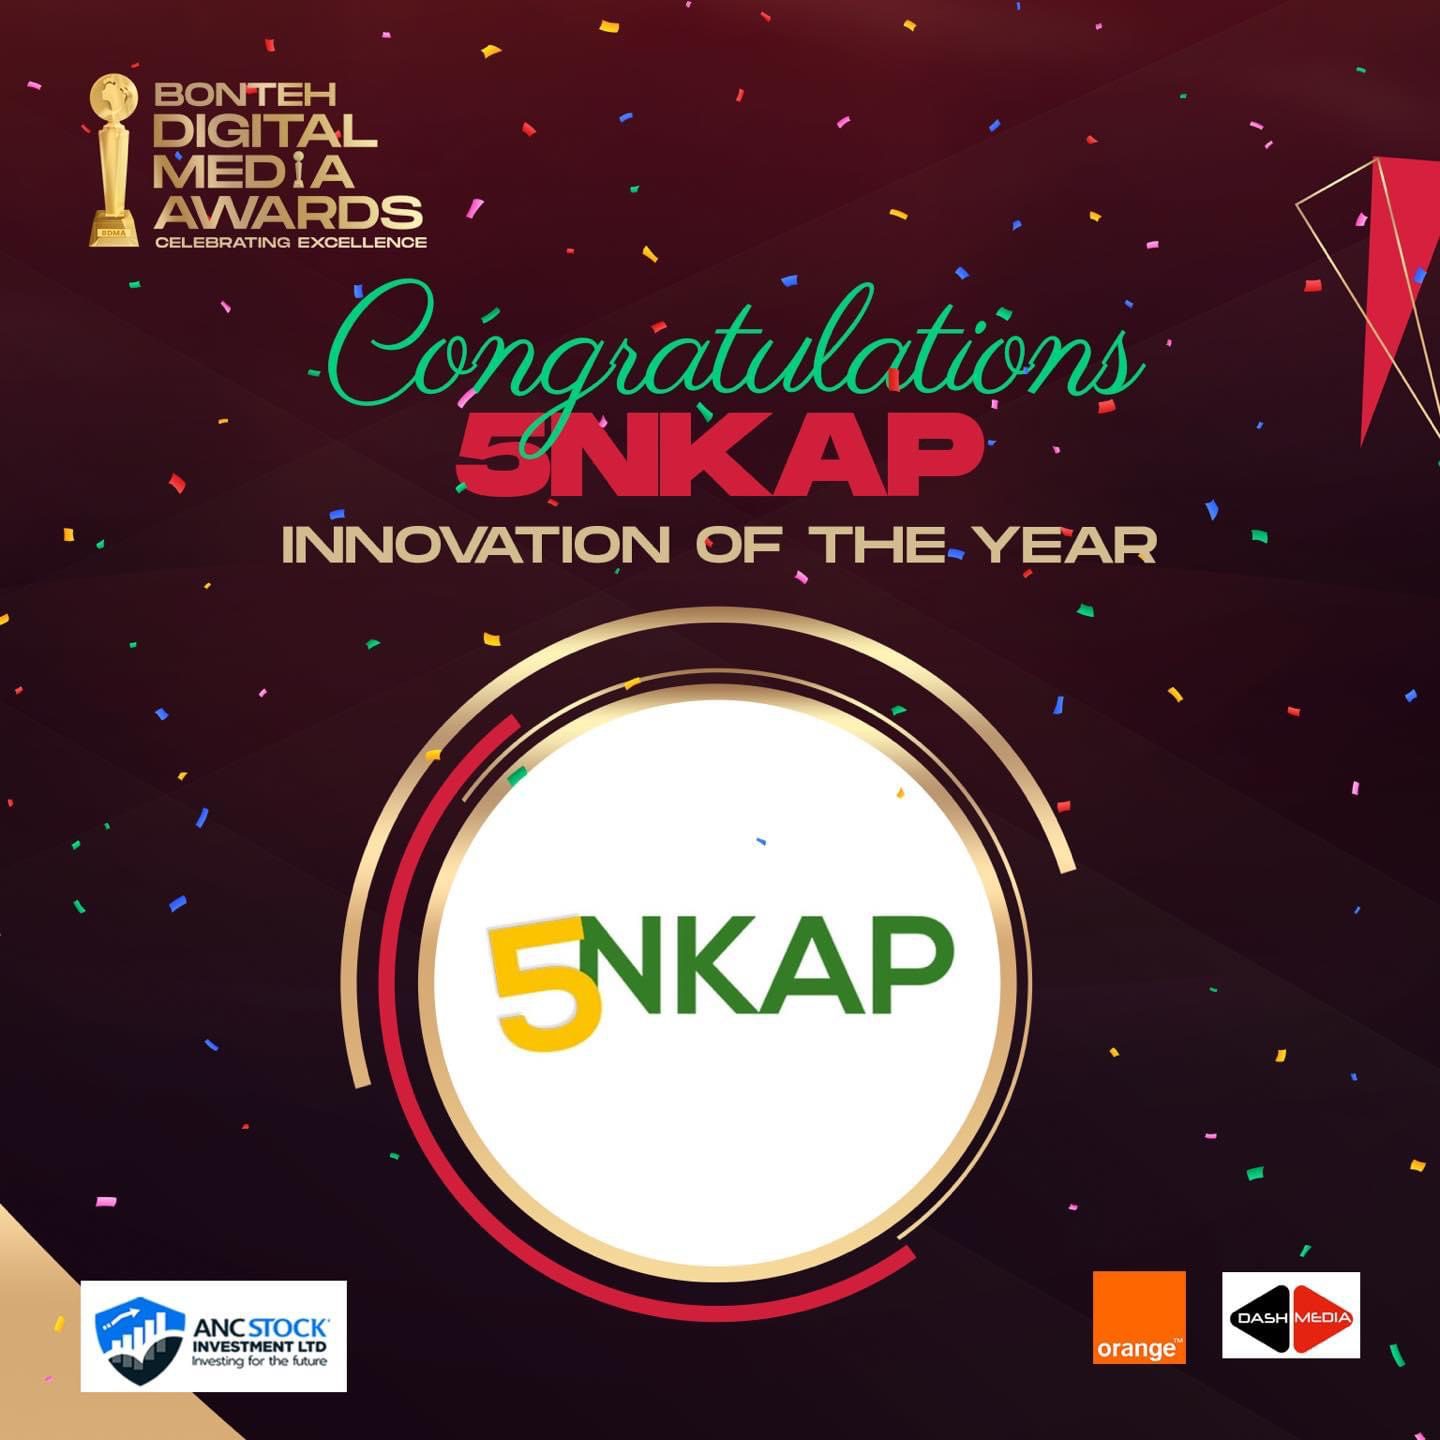 Innovation Of The Year: 5NKAP Officiel